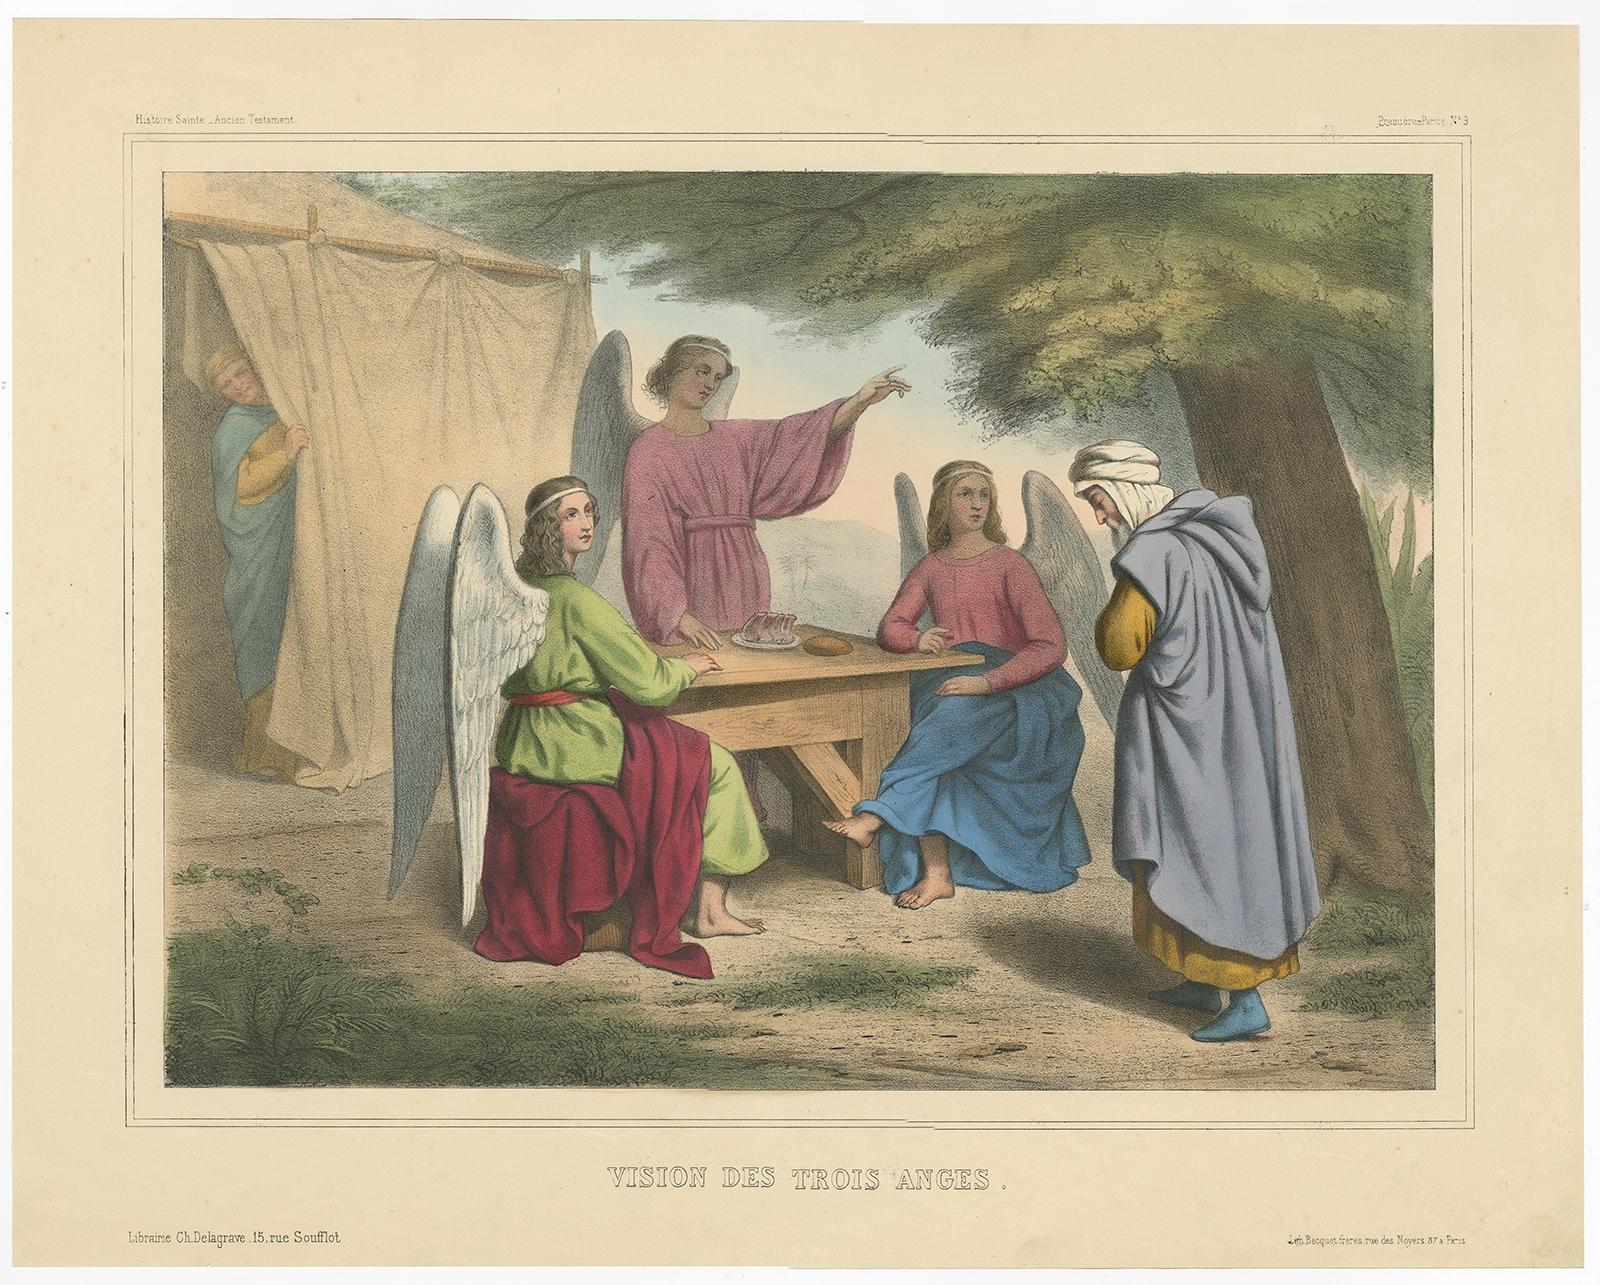 Antique print, titled: 'Histoire Sainte. - Ancien Testament. Vision des trois Anges' - This plate shows a scene from the Old Testament; The vision of the three Angels.

From a Rare set of 60 plates showing scenes from the Old Testament of the